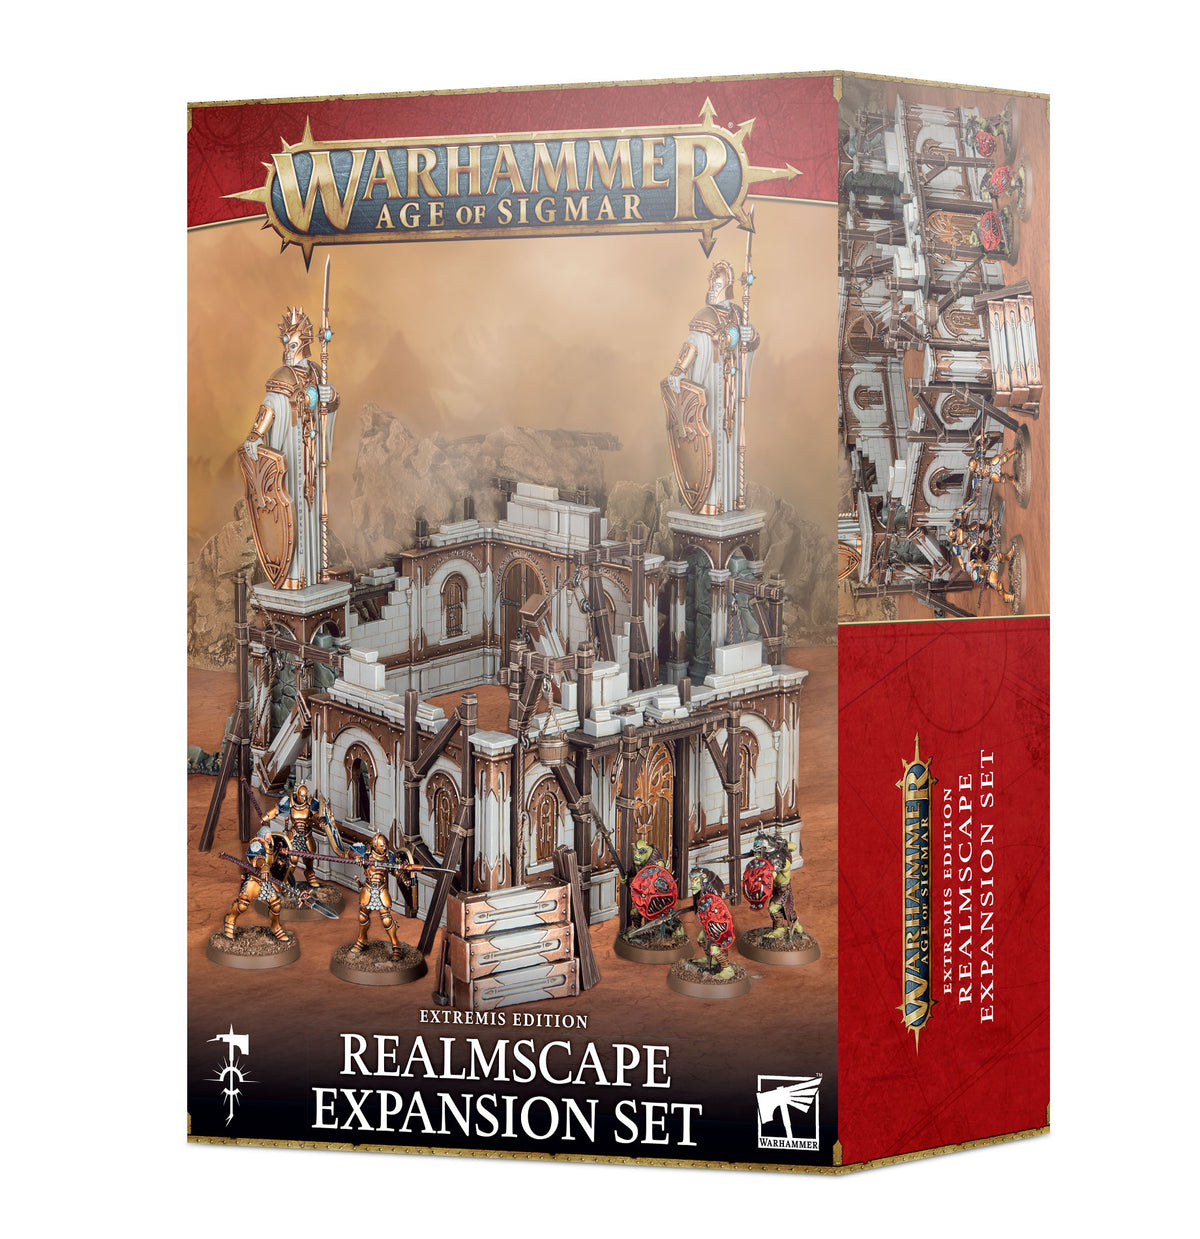 Age of Sigmar – Realmscale Expansion Set (80-06)